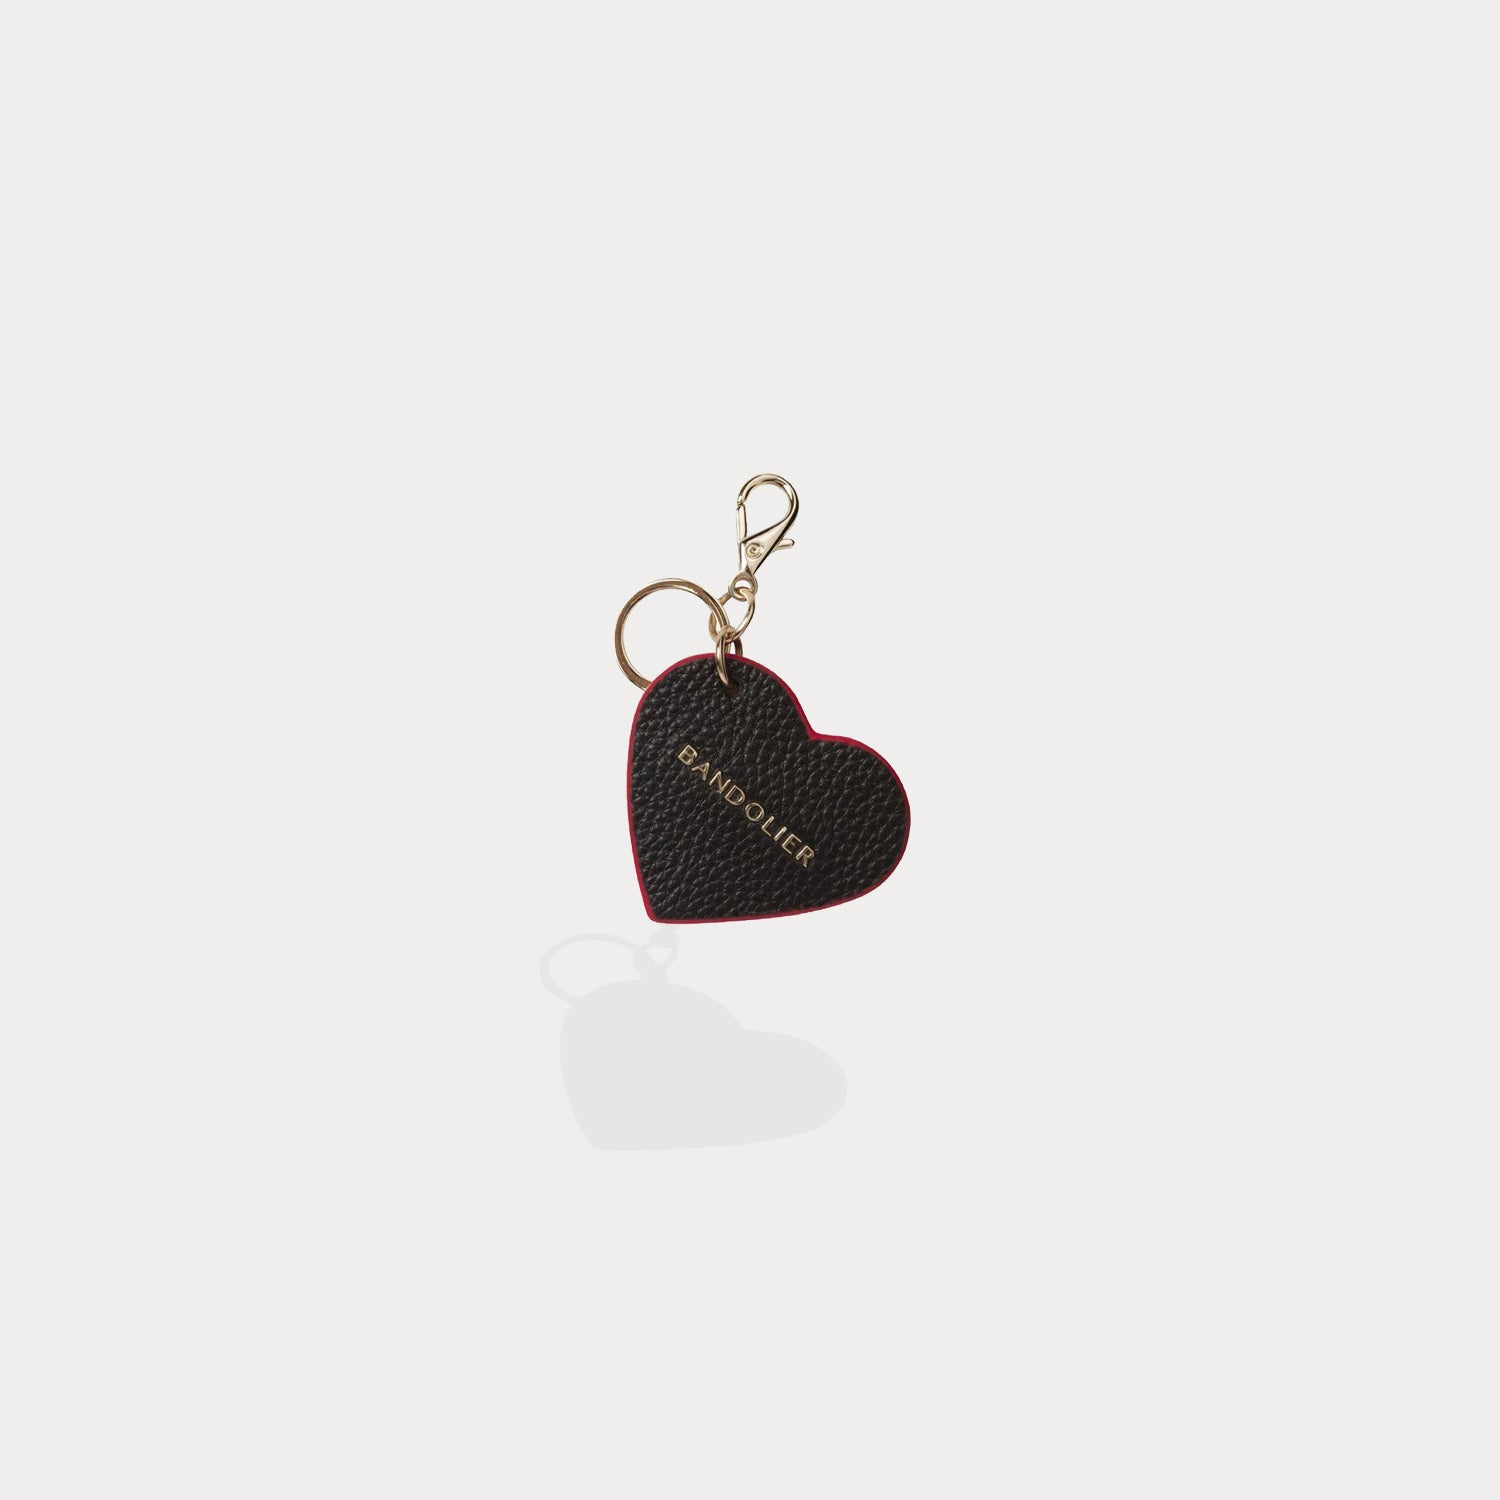 6_Bandolier-Pebble-Leather-Heart-Keychain---Black-Red-Gold_1_1.jpg